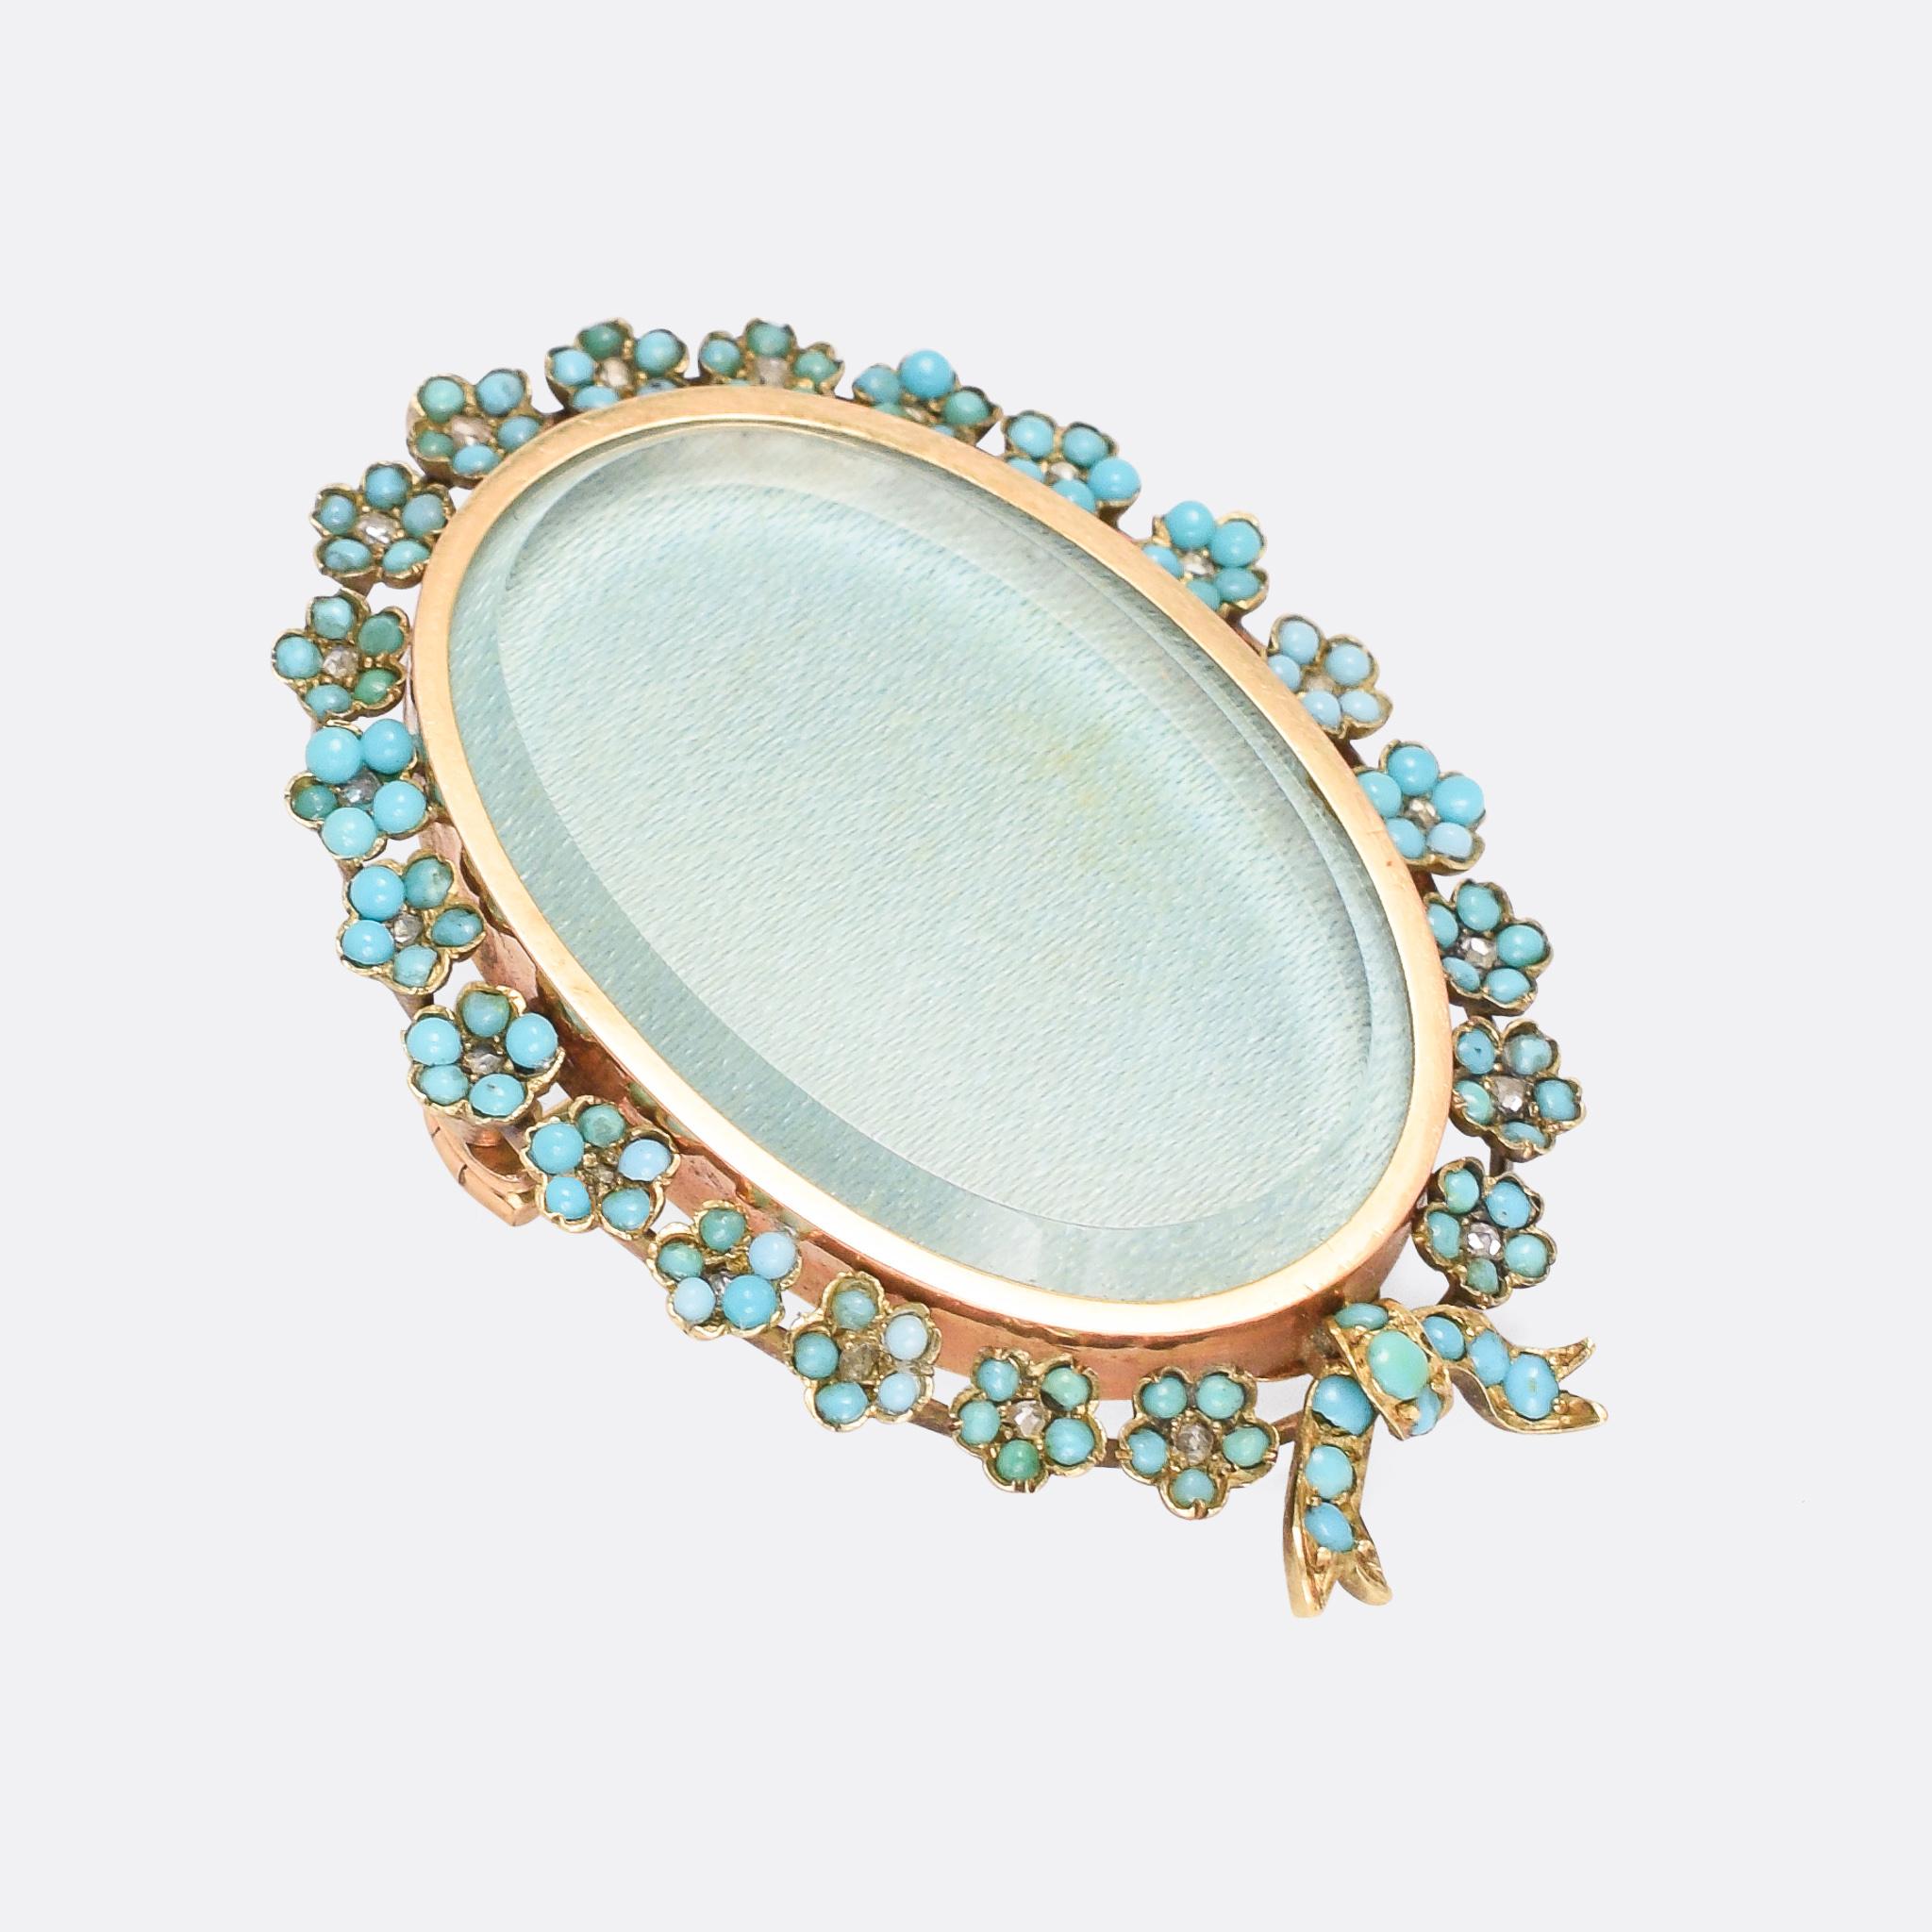 A beautiful antique locket, with fittings for wear either as a brooch or a pendant. The bevelled glass front is accessed from the back, and bordered by intricately worked forget-me-not flowers – each one set with five turquoise cabochon petals and a